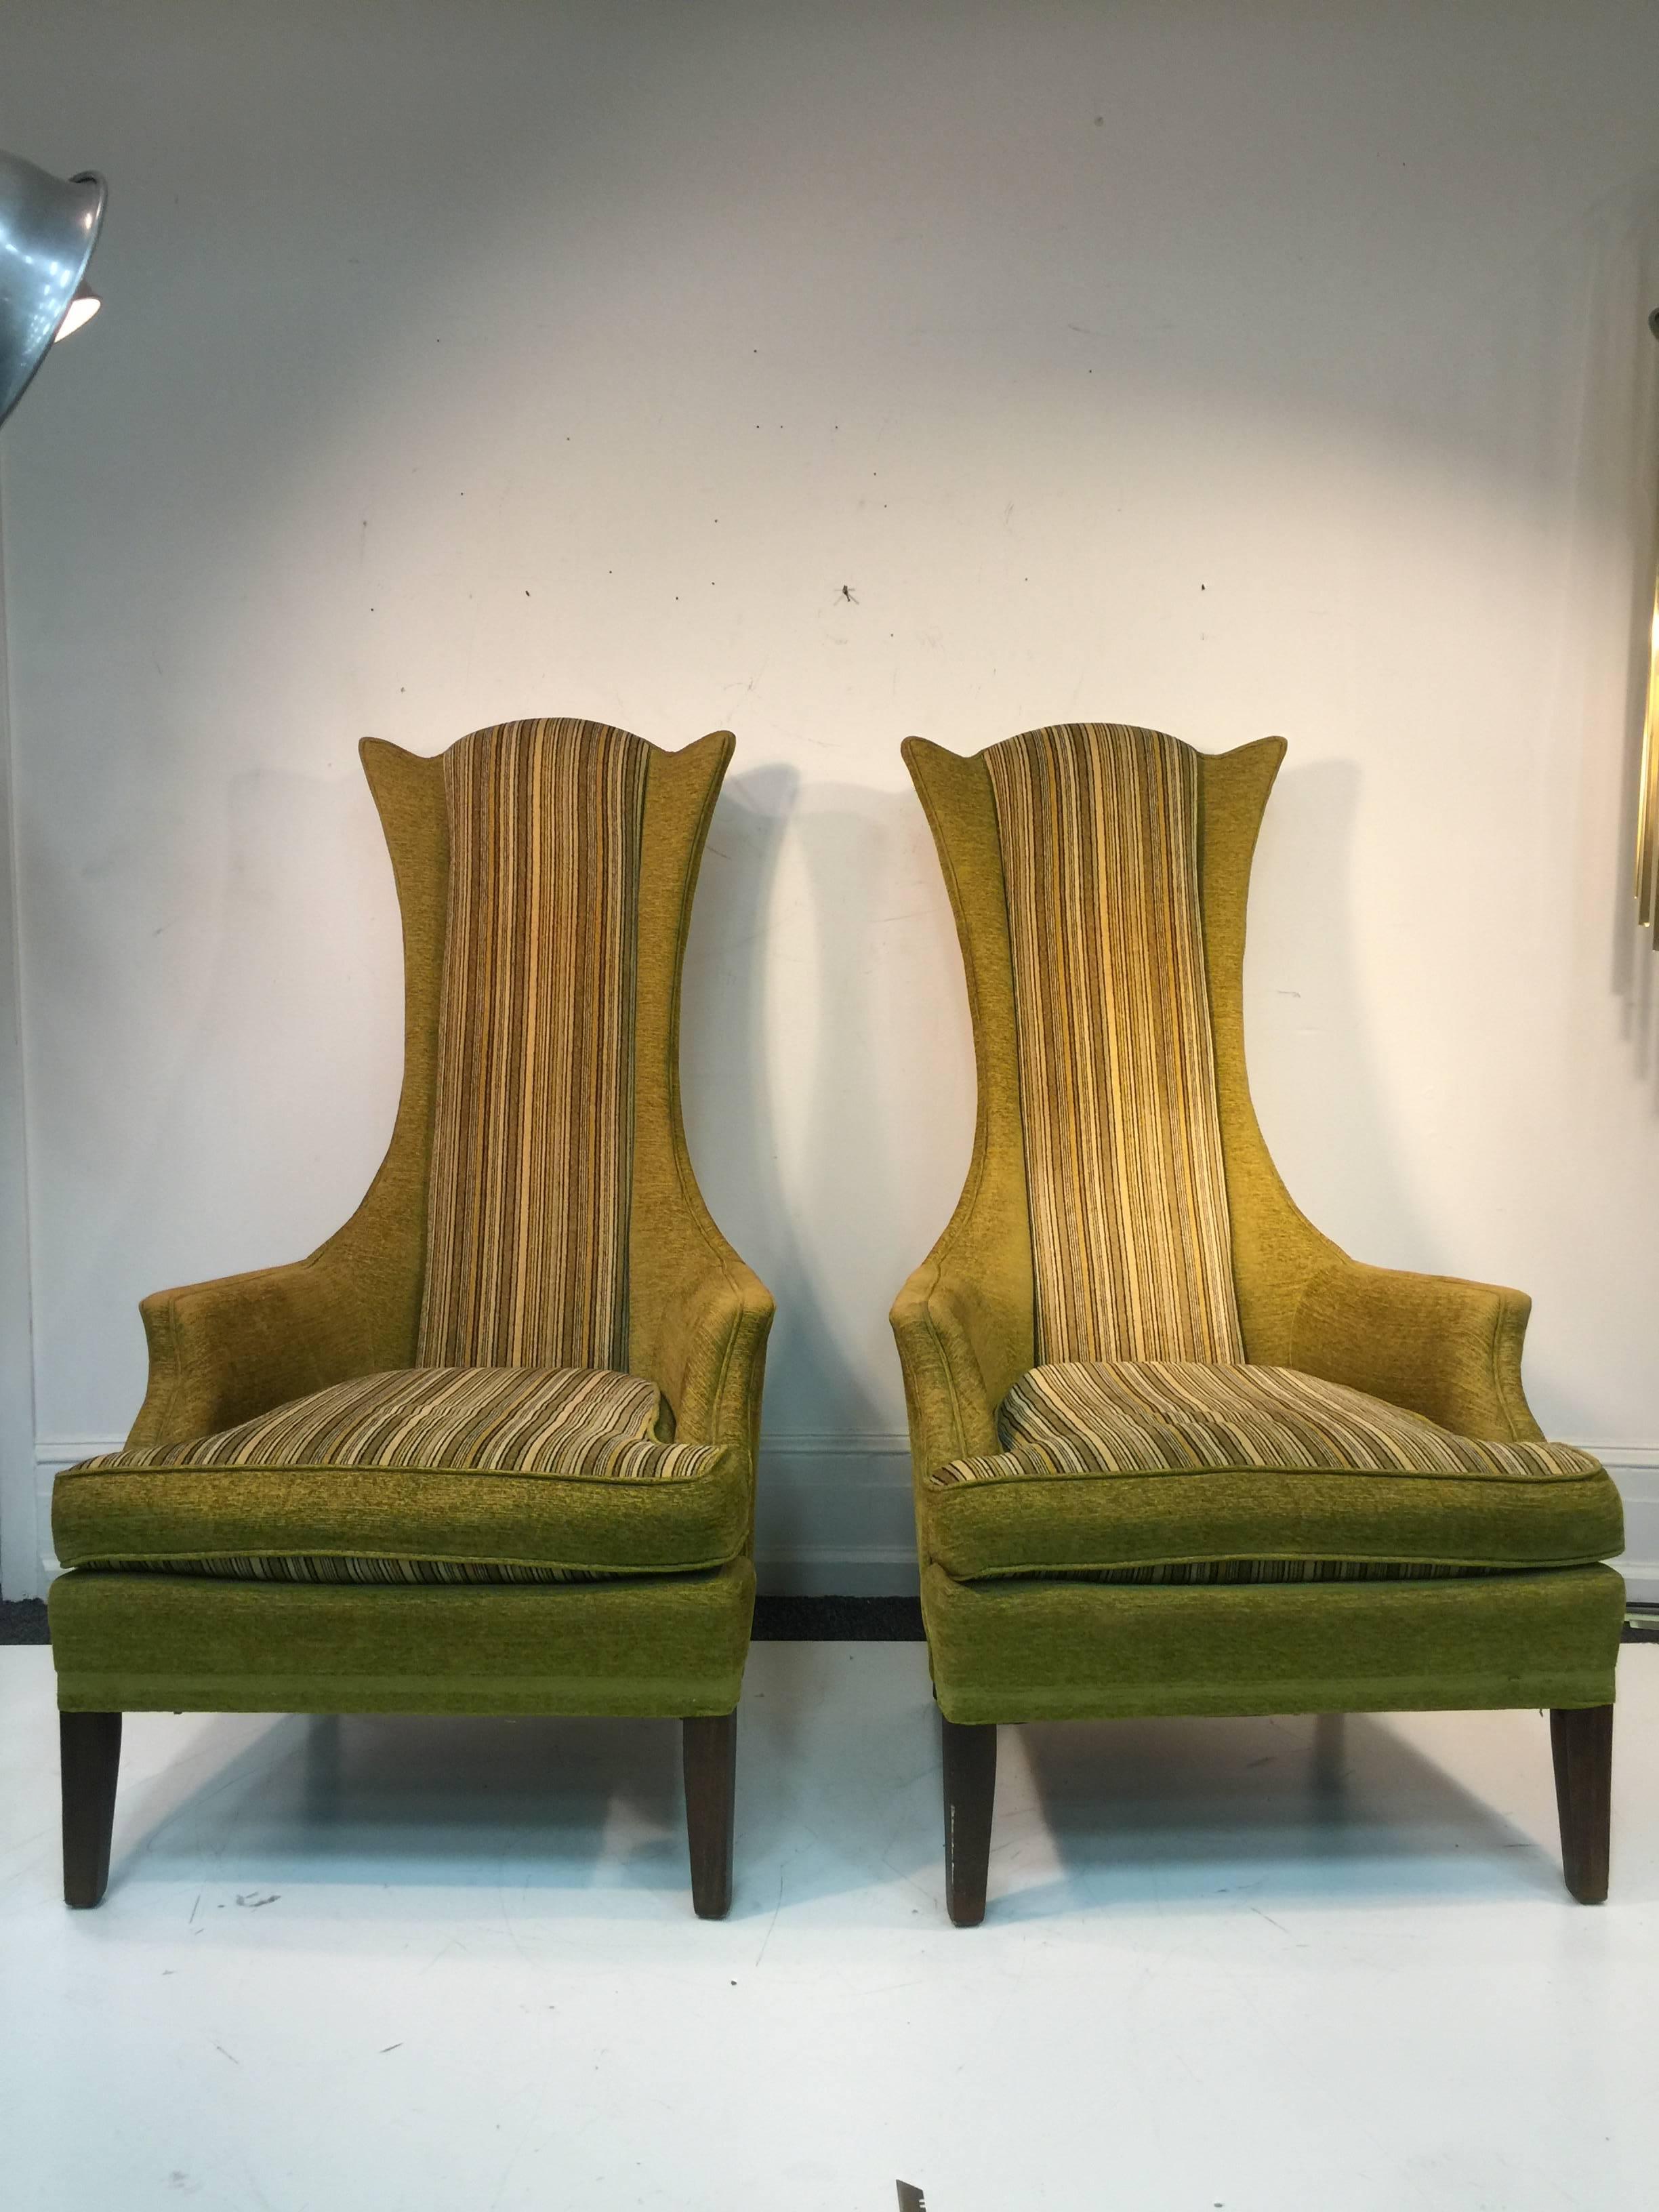 An unusual pair of high back armchairs in original moss or olive green upholstery with stripes by Adrian Pearsall, circa 1960. The design is inspired by Tommi Parzinger. Good vintage condition.